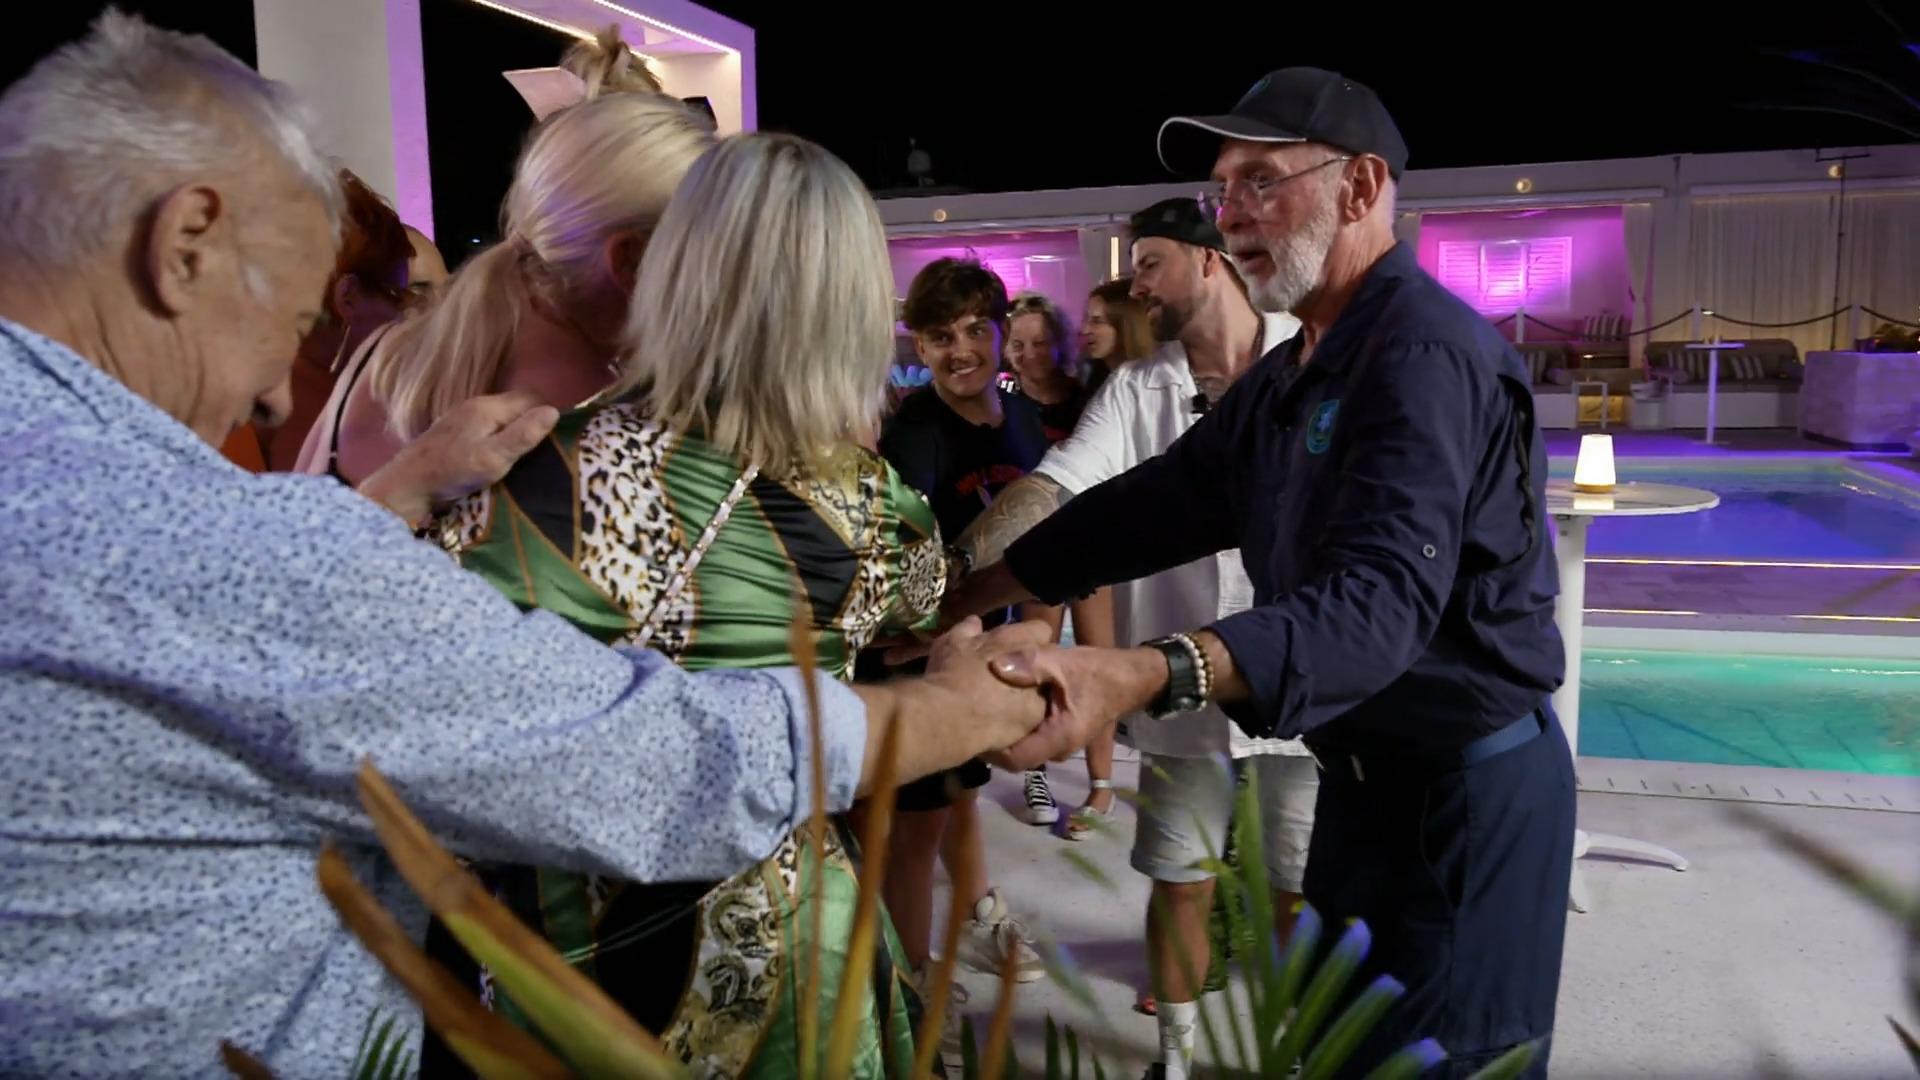 Dr.  Bob causes tears among the jungle camp celebrities "This season was special"